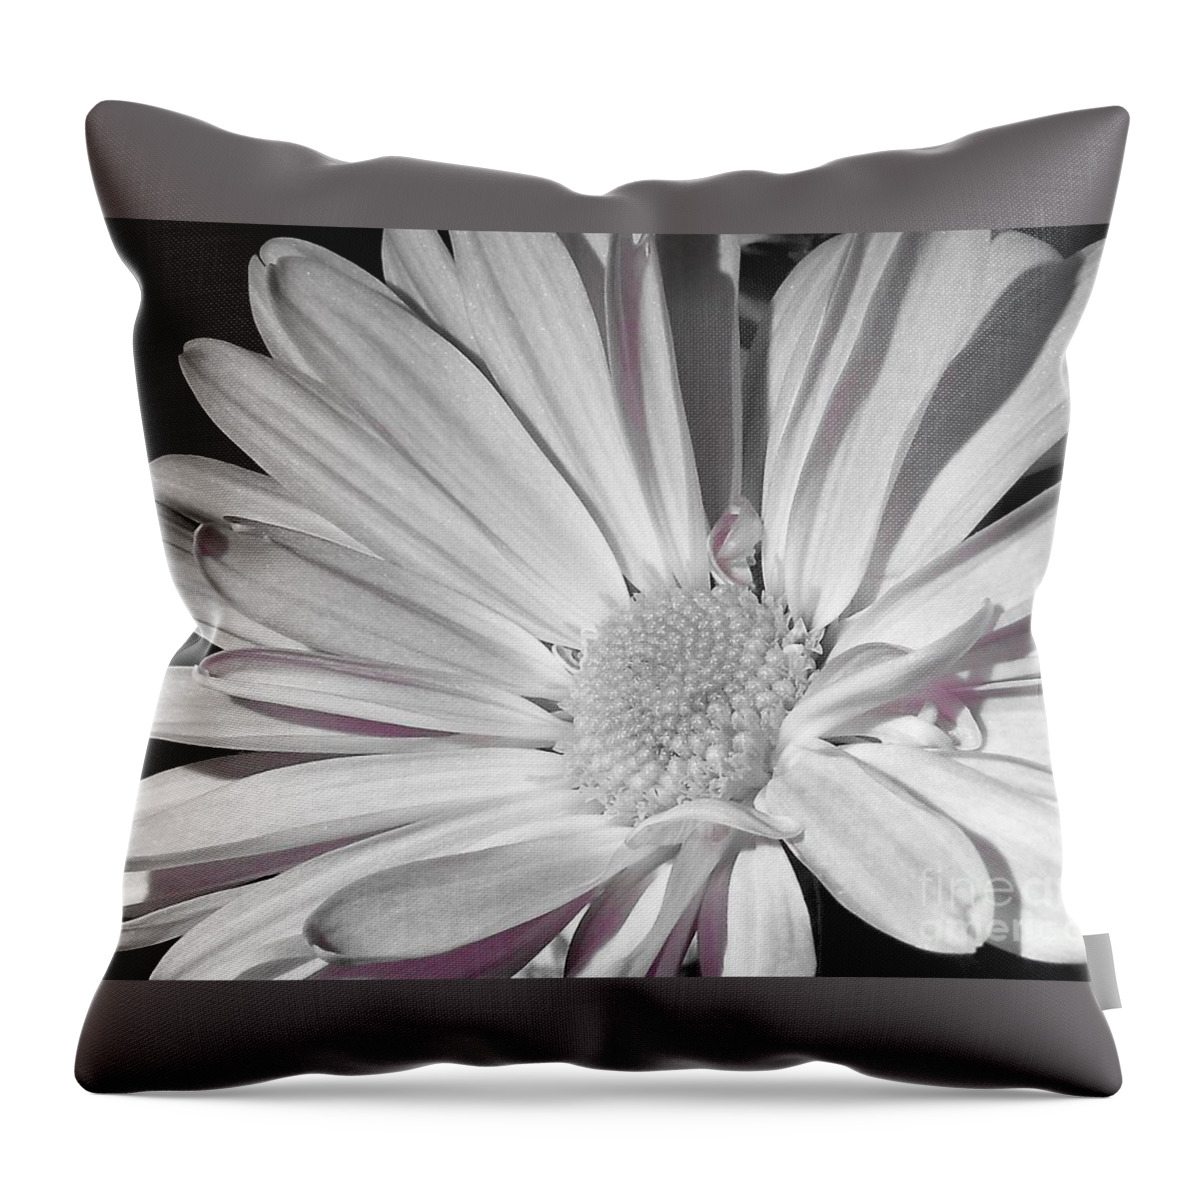 Flower Throw Pillow featuring the photograph Daisy Flower by Chad and Stacey Hall